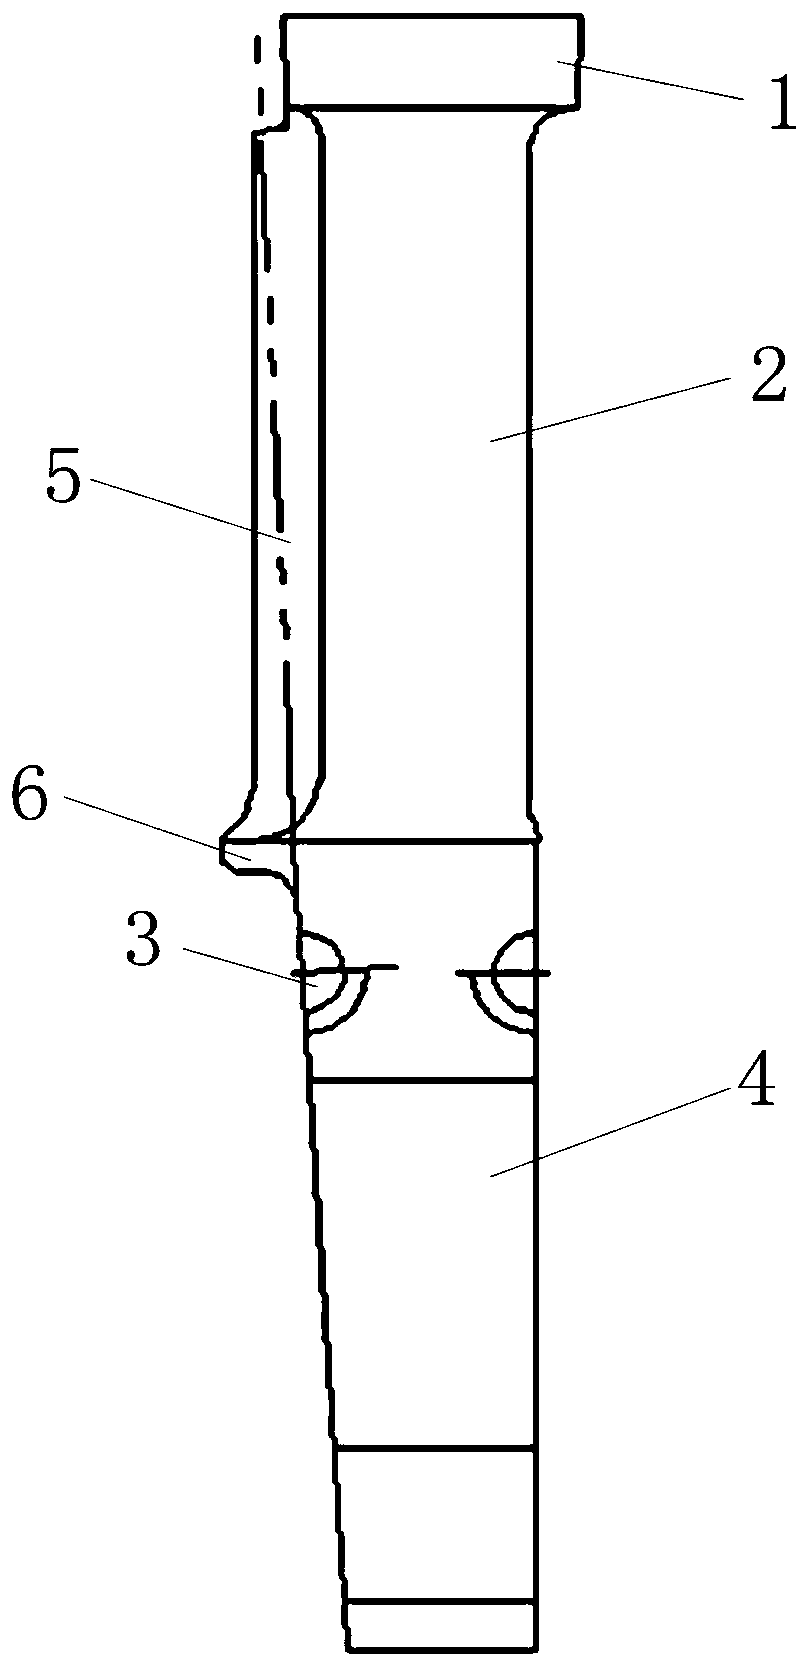 Steam turbine slim blade and moving blade assembly consisting of same